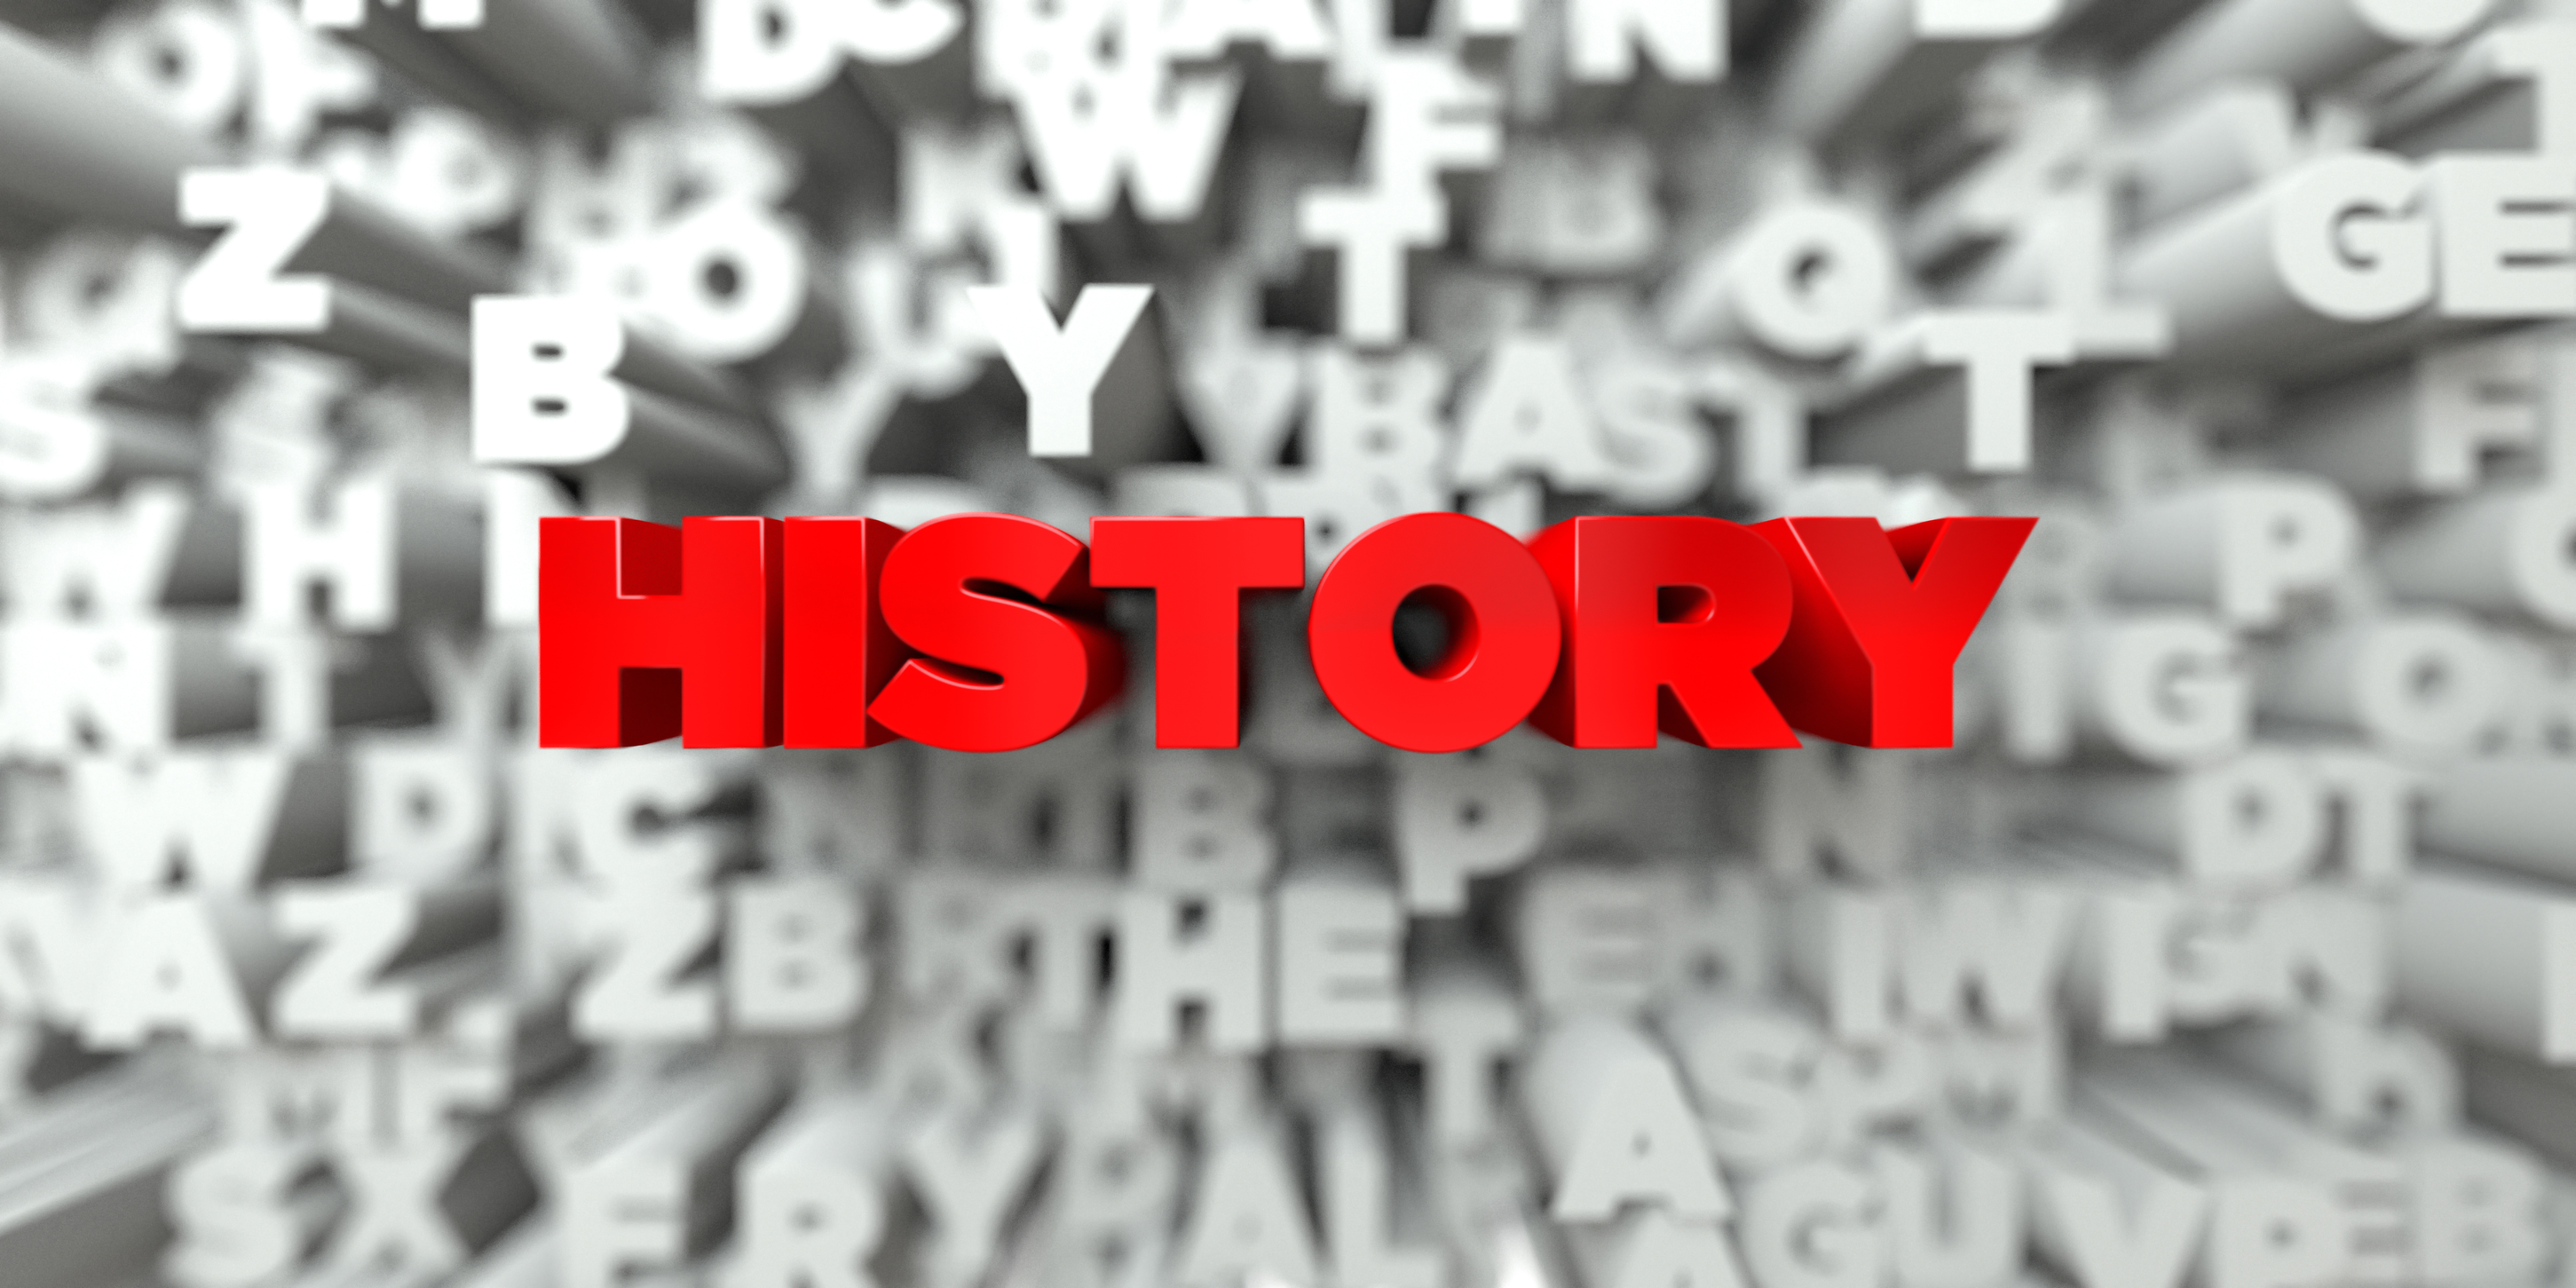 HISTORY -   3D stock image of Red text on white background